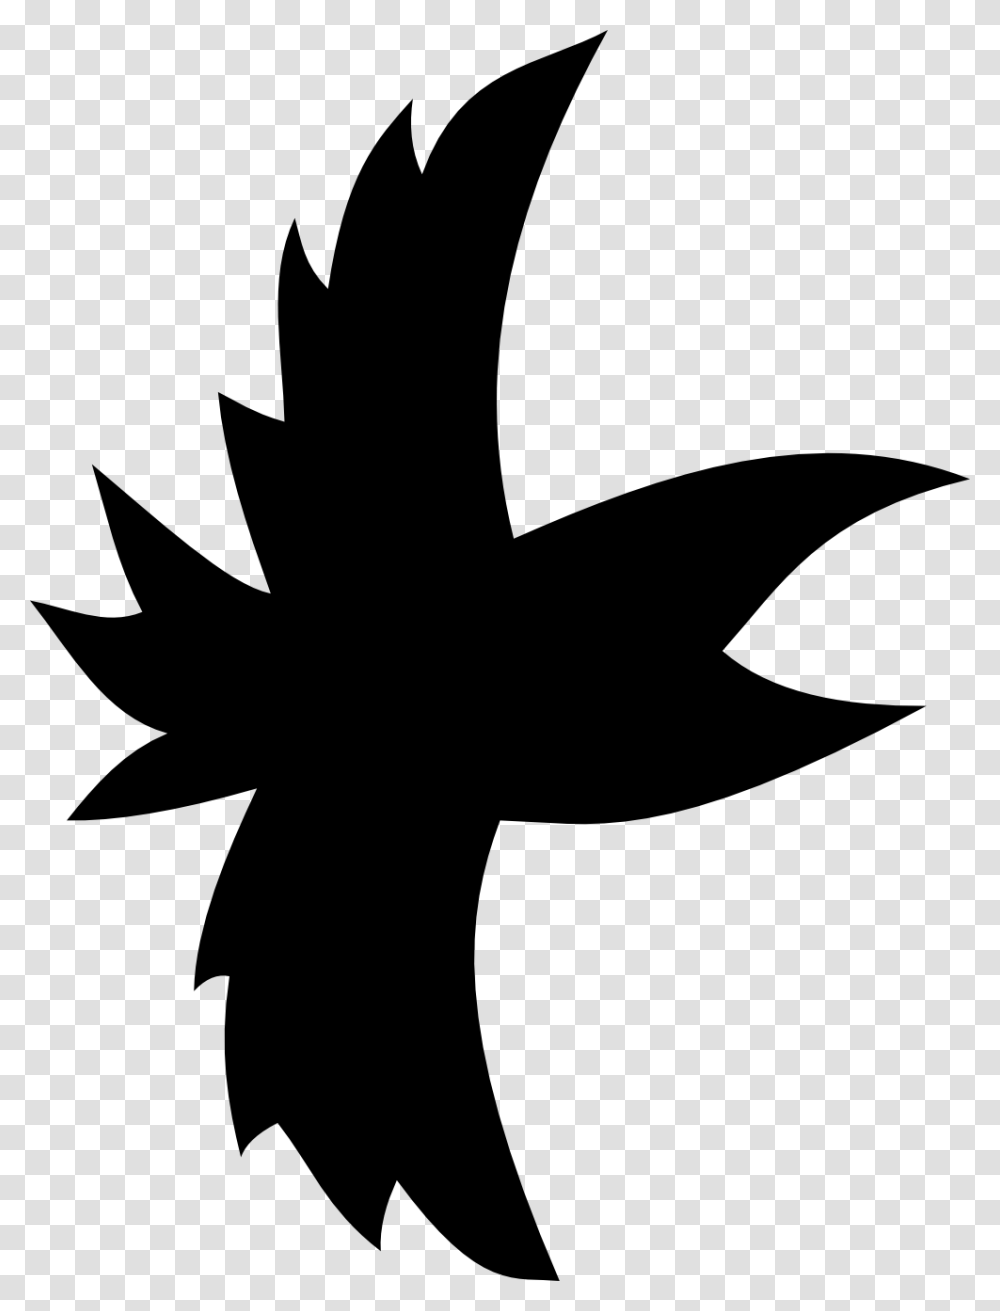 Crow Clip Art Black And White Free Clipart Images, Leaf, Plant, Silhouette, Axe Transparent Png